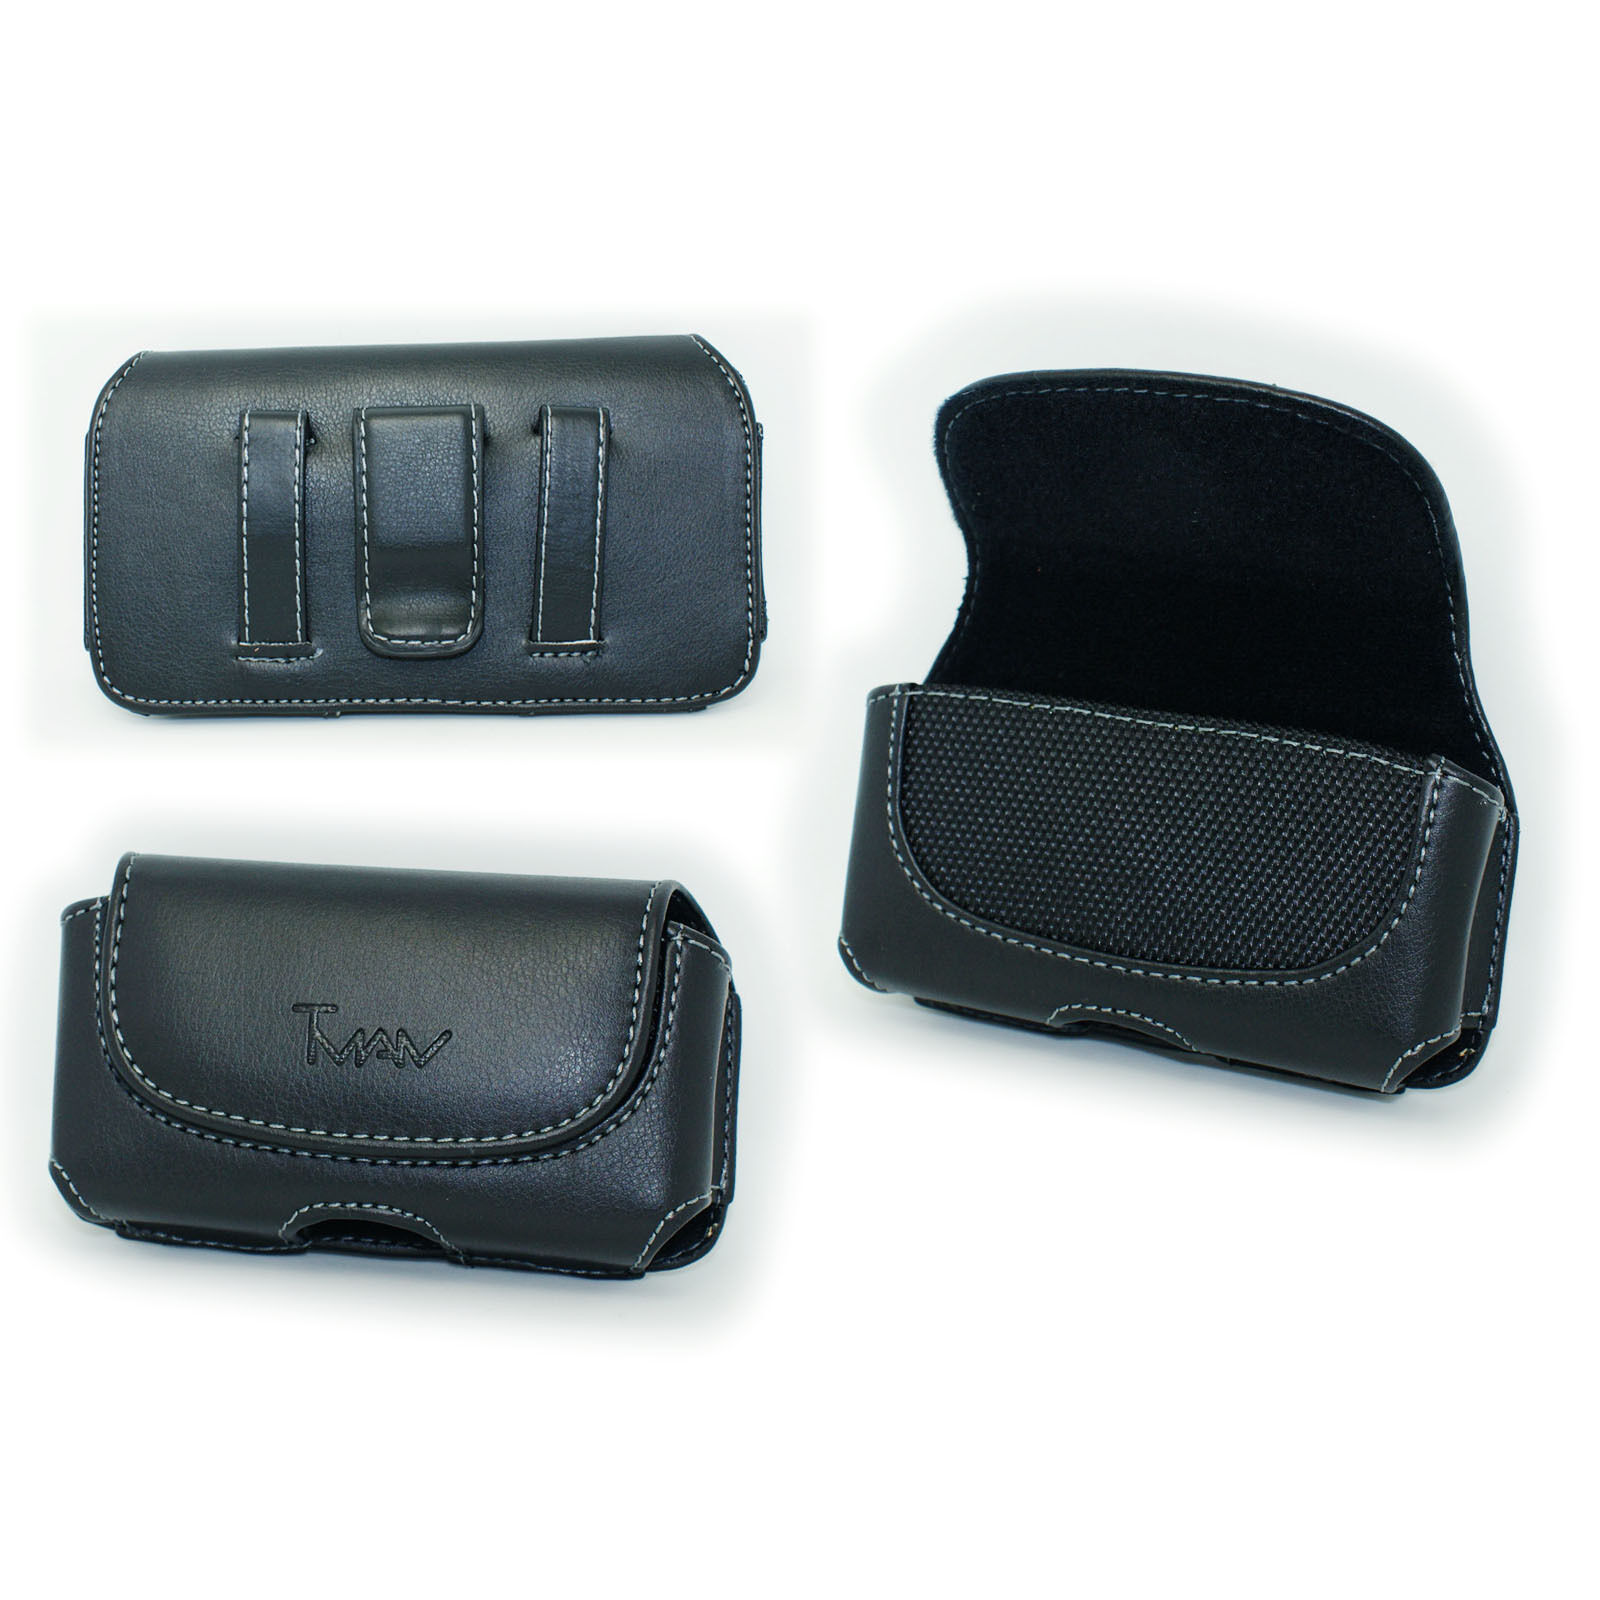 Belt Holster Pouch for Samsung Galaxy J7 J7v (fits with Incipio DualPro Case) - $24.99